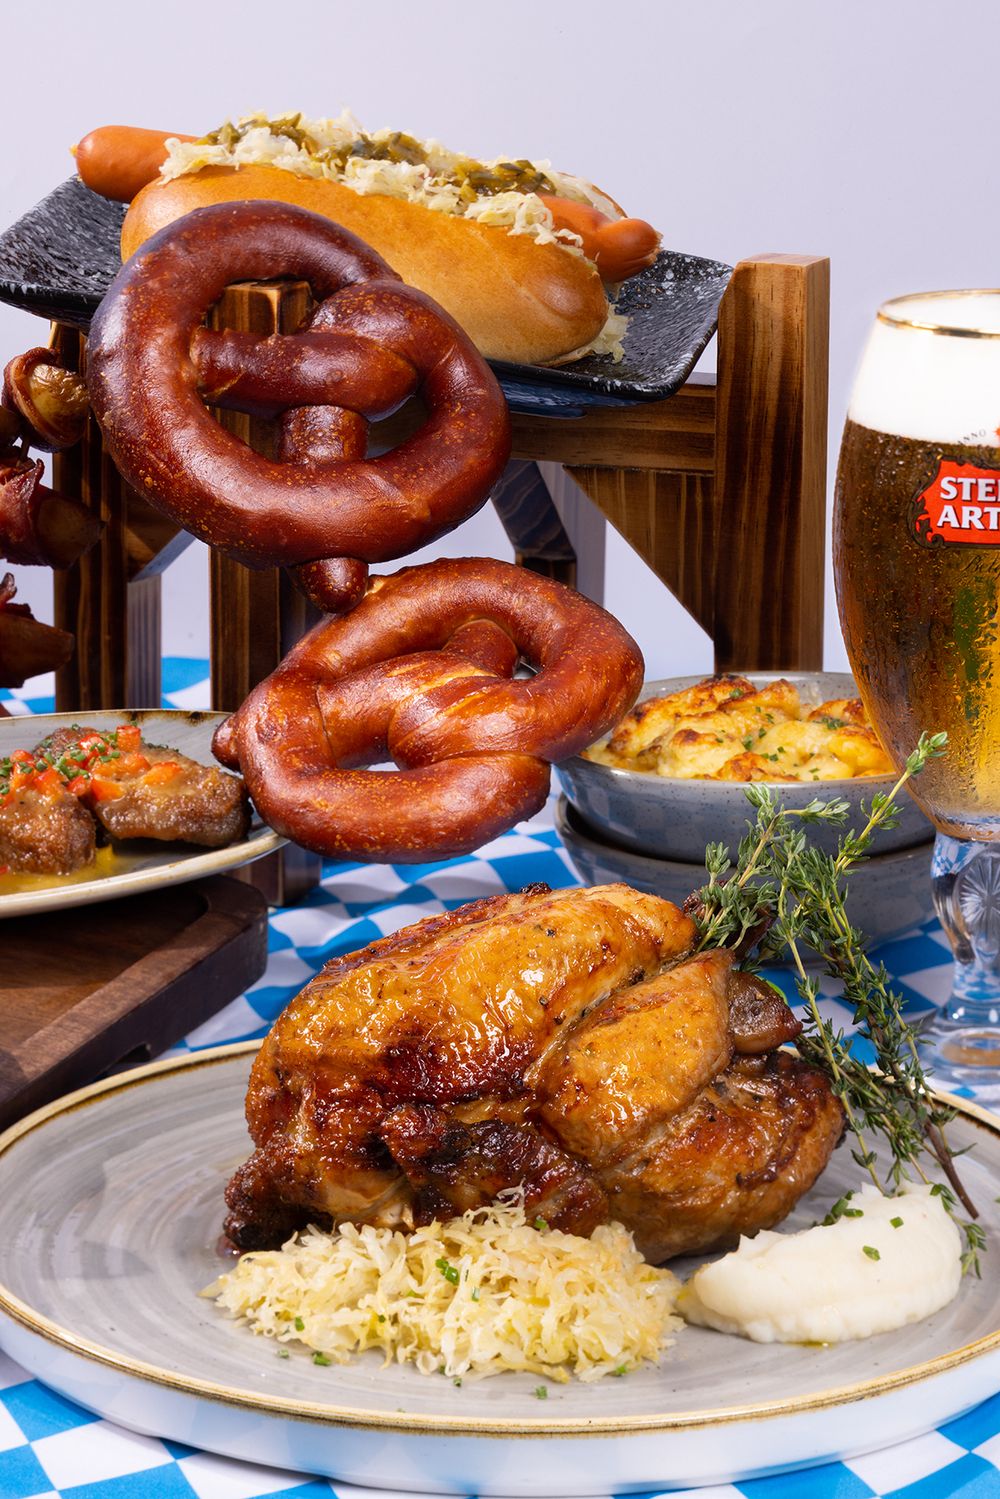 Oktoberfest returns with endless options of German beer, cuisines and beer-themed games